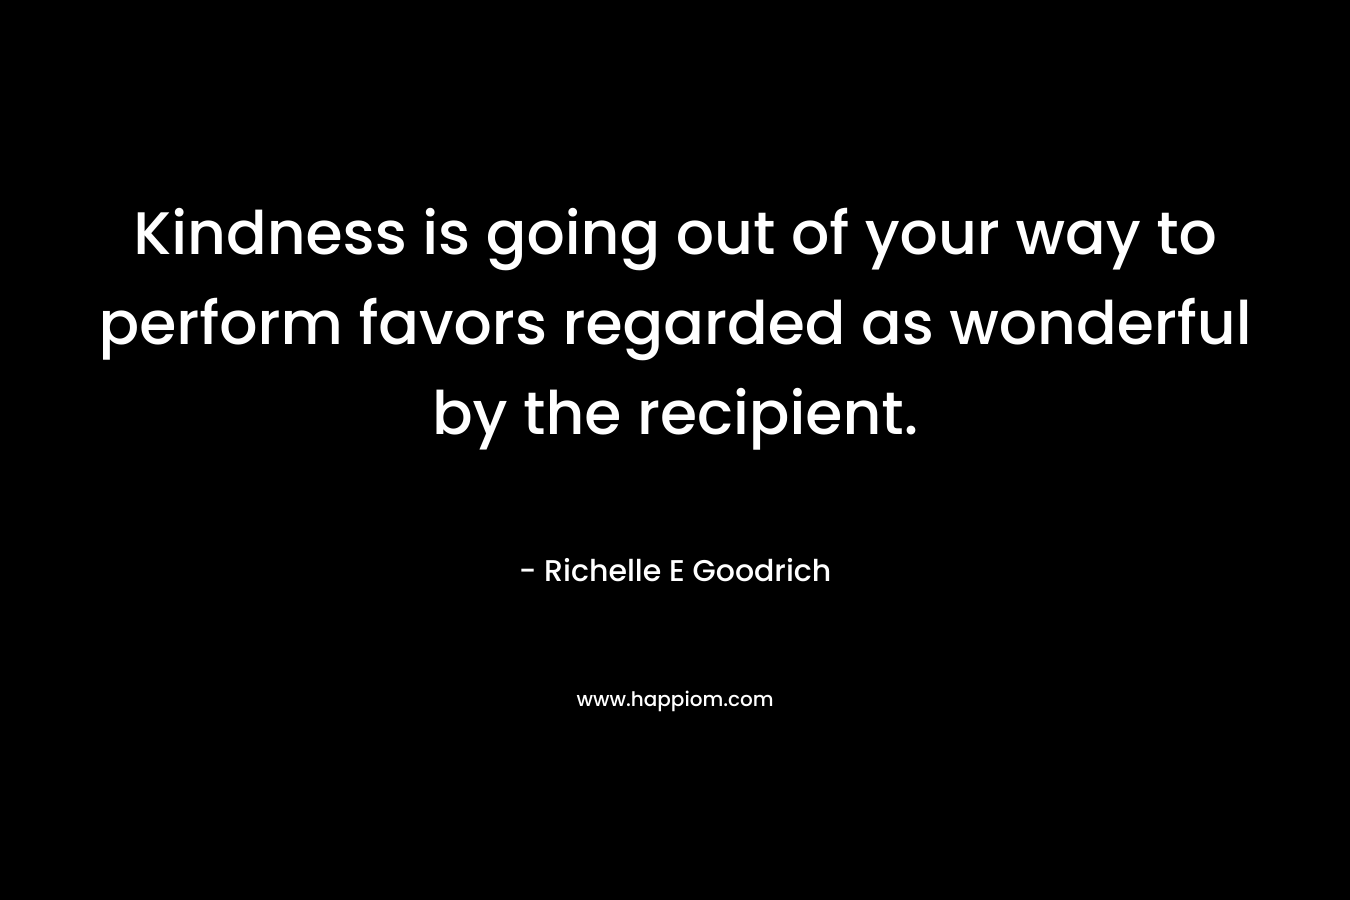 Kindness is going out of your way to perform favors regarded as wonderful by the recipient. – Richelle E Goodrich